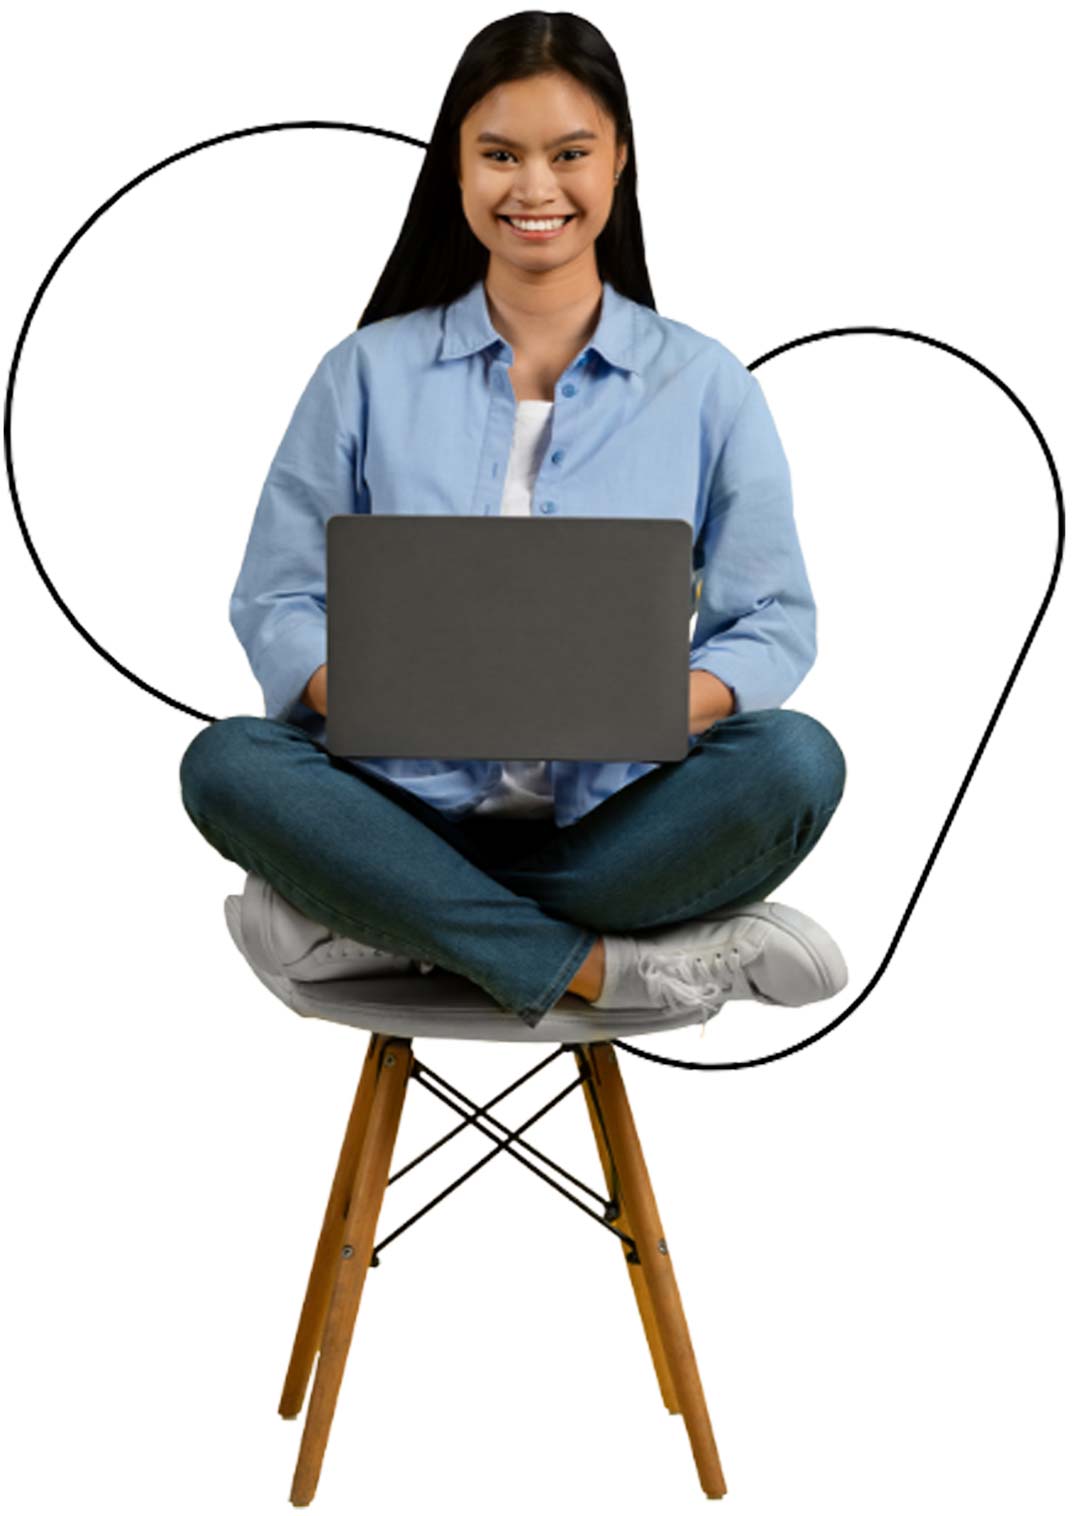 Person Sitting on the Chair With Laptop